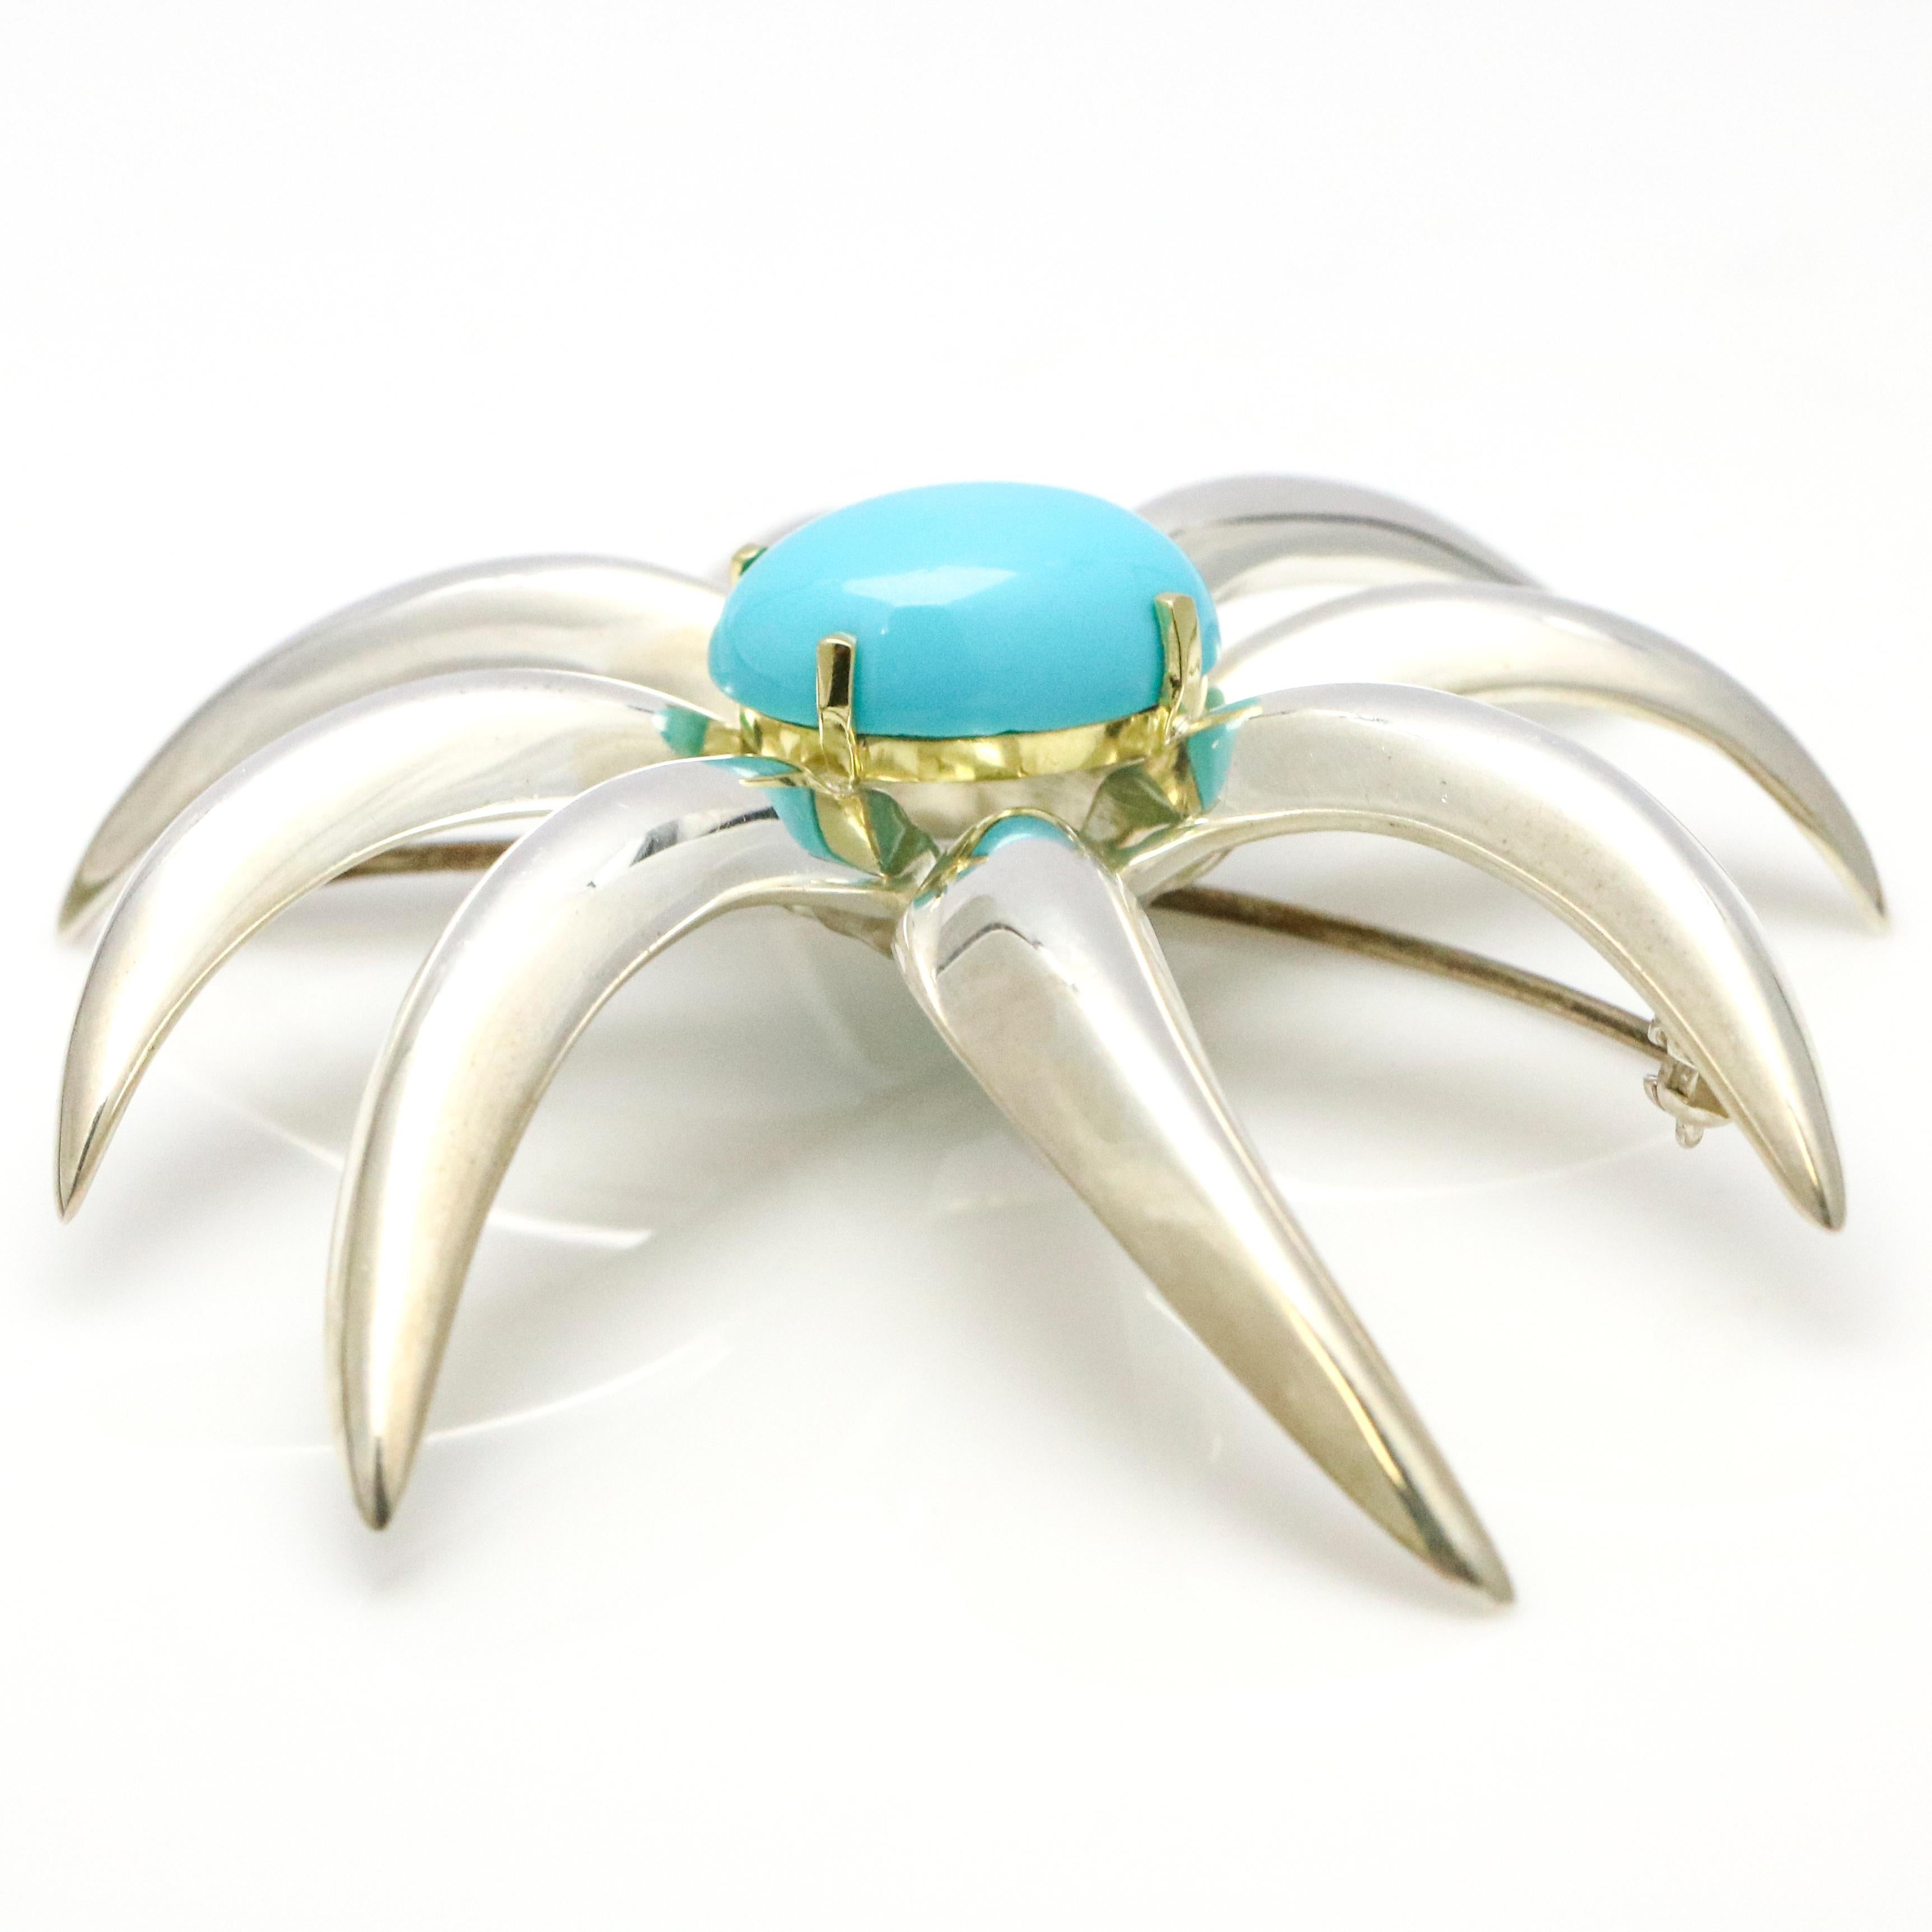 1995 Tiffany & Co. Fireworks Brooch in sterling silver and 18 karat yellow gold. The pin has a cabochon Persian turquoise gemstone center. Turquoise, 16mm x 12mm.